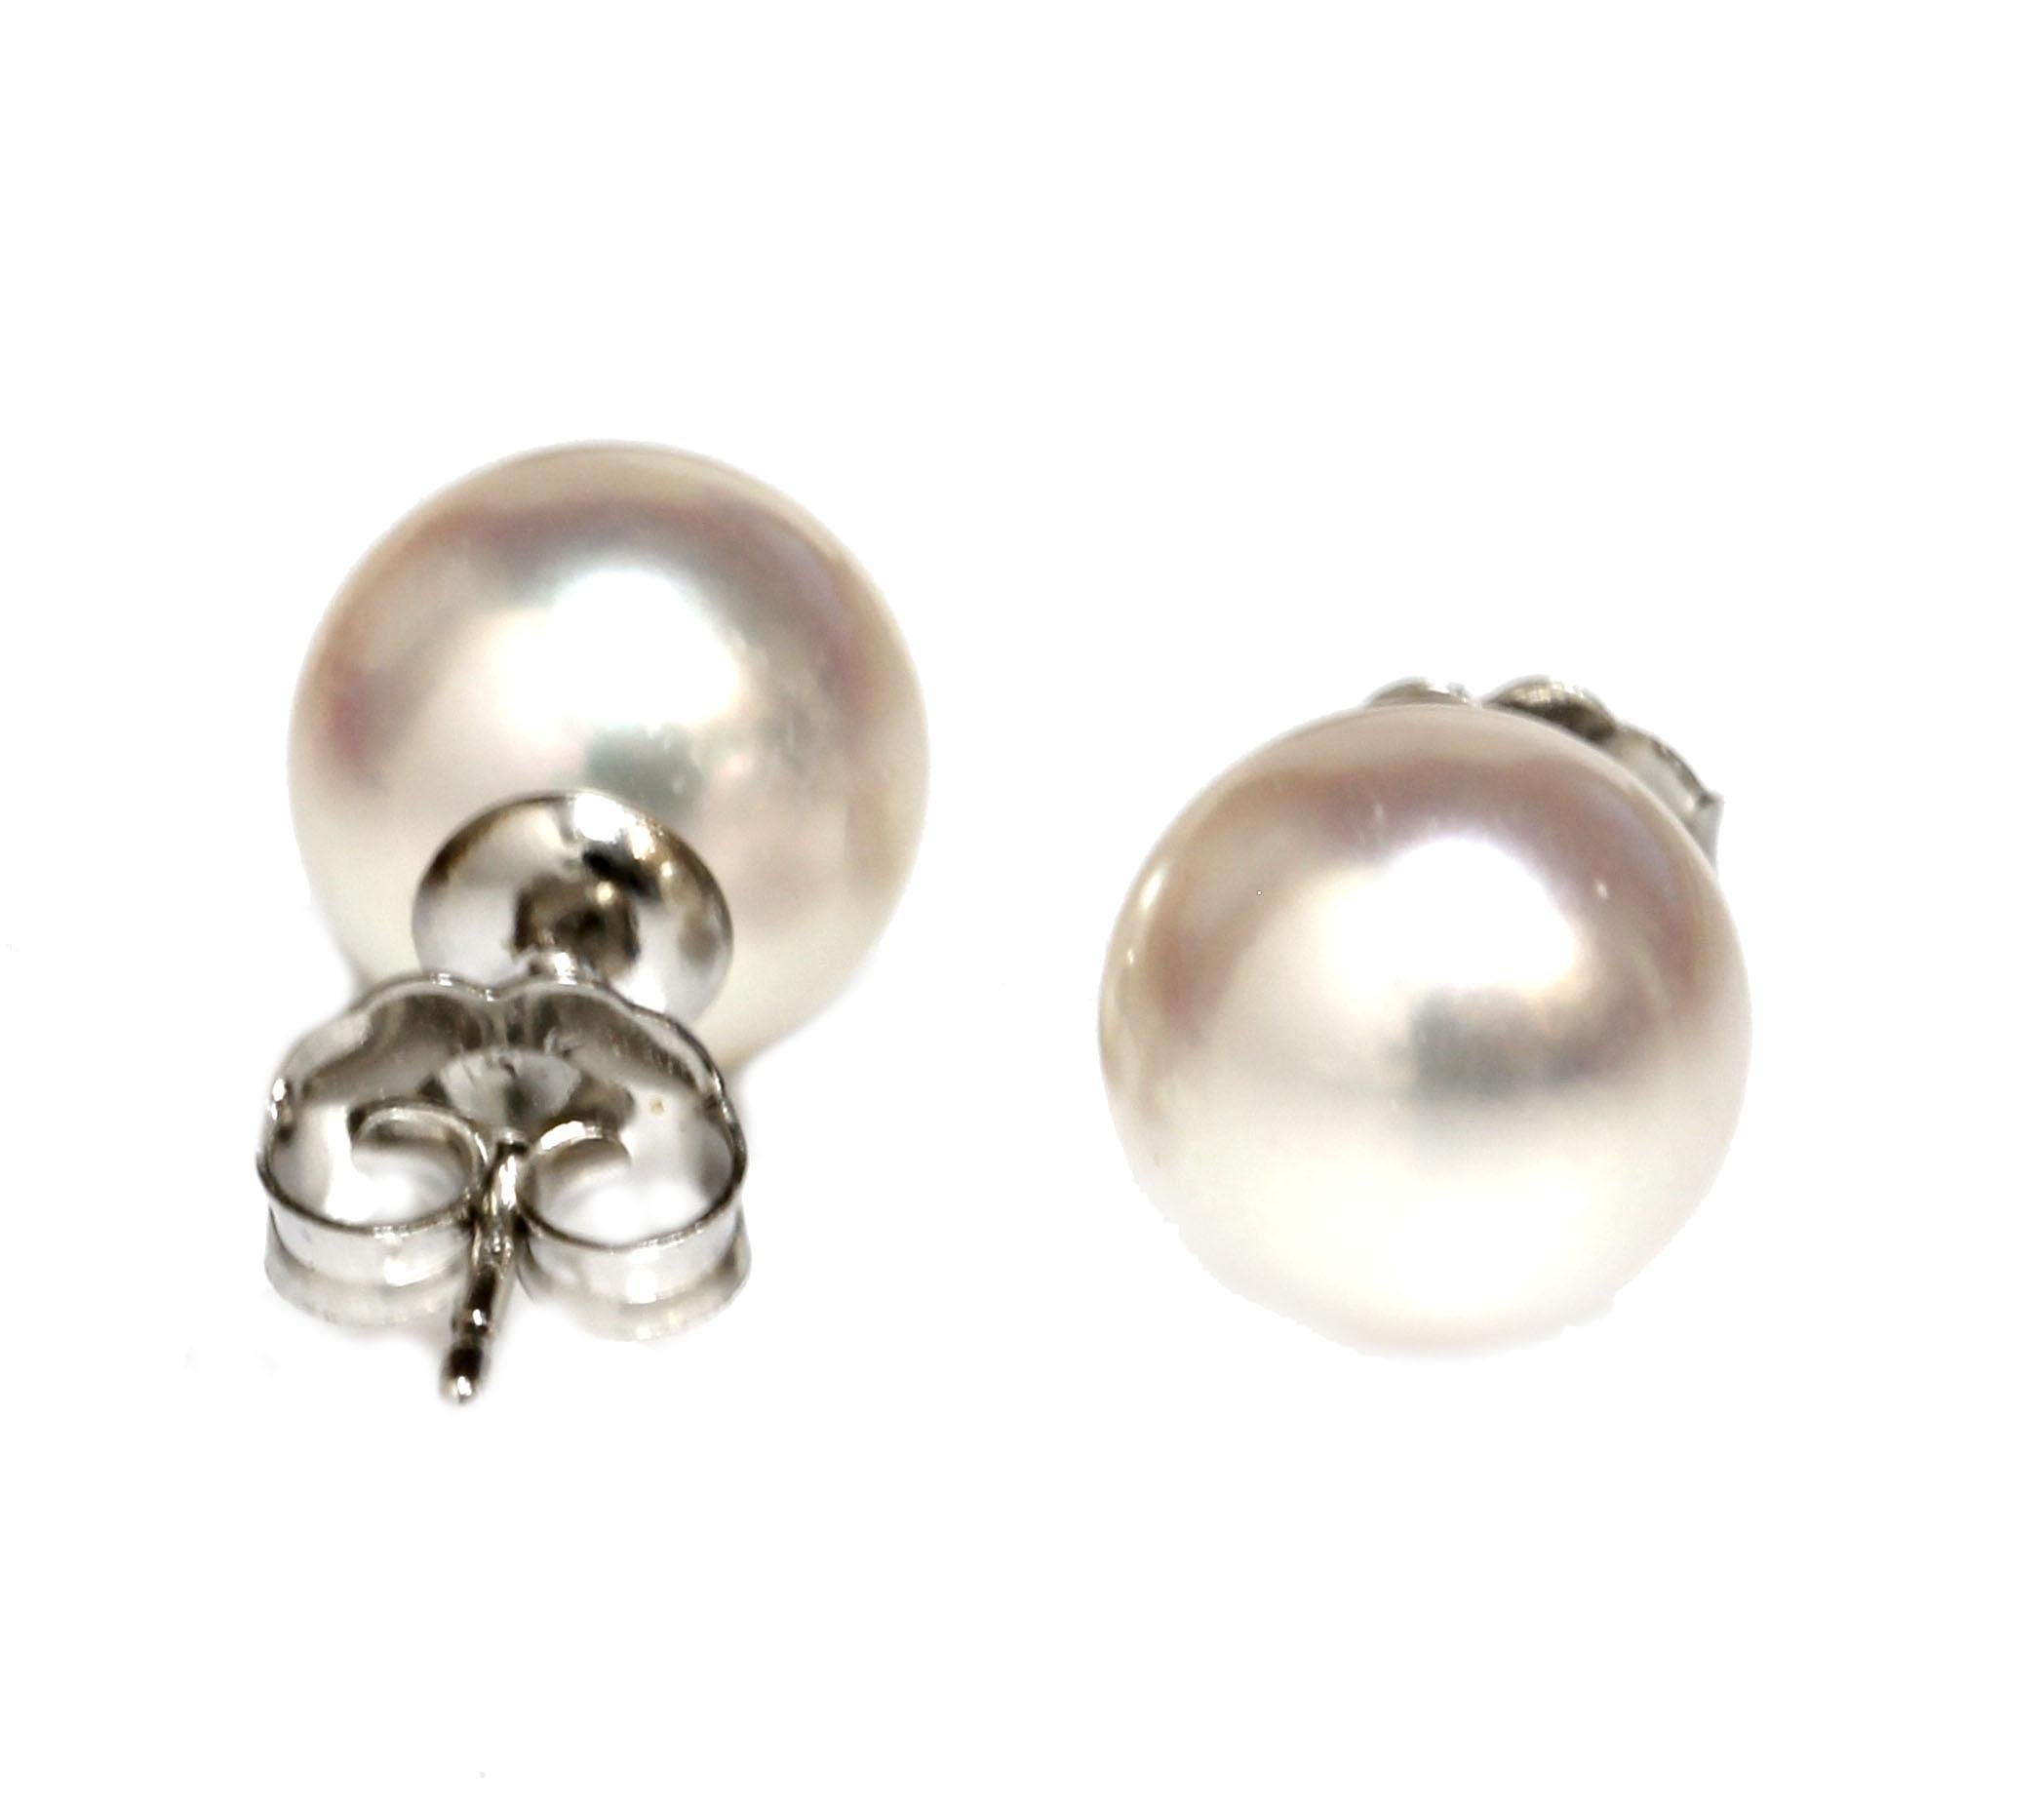 Our traditional classic saltwater akoya pearl stud earrings, the size is 9 - 8.5mm with top luster and nacre. They are flawless in surface clarity.  They are perfect round pearls with perfect classic white in color . They are set in 14k White gold